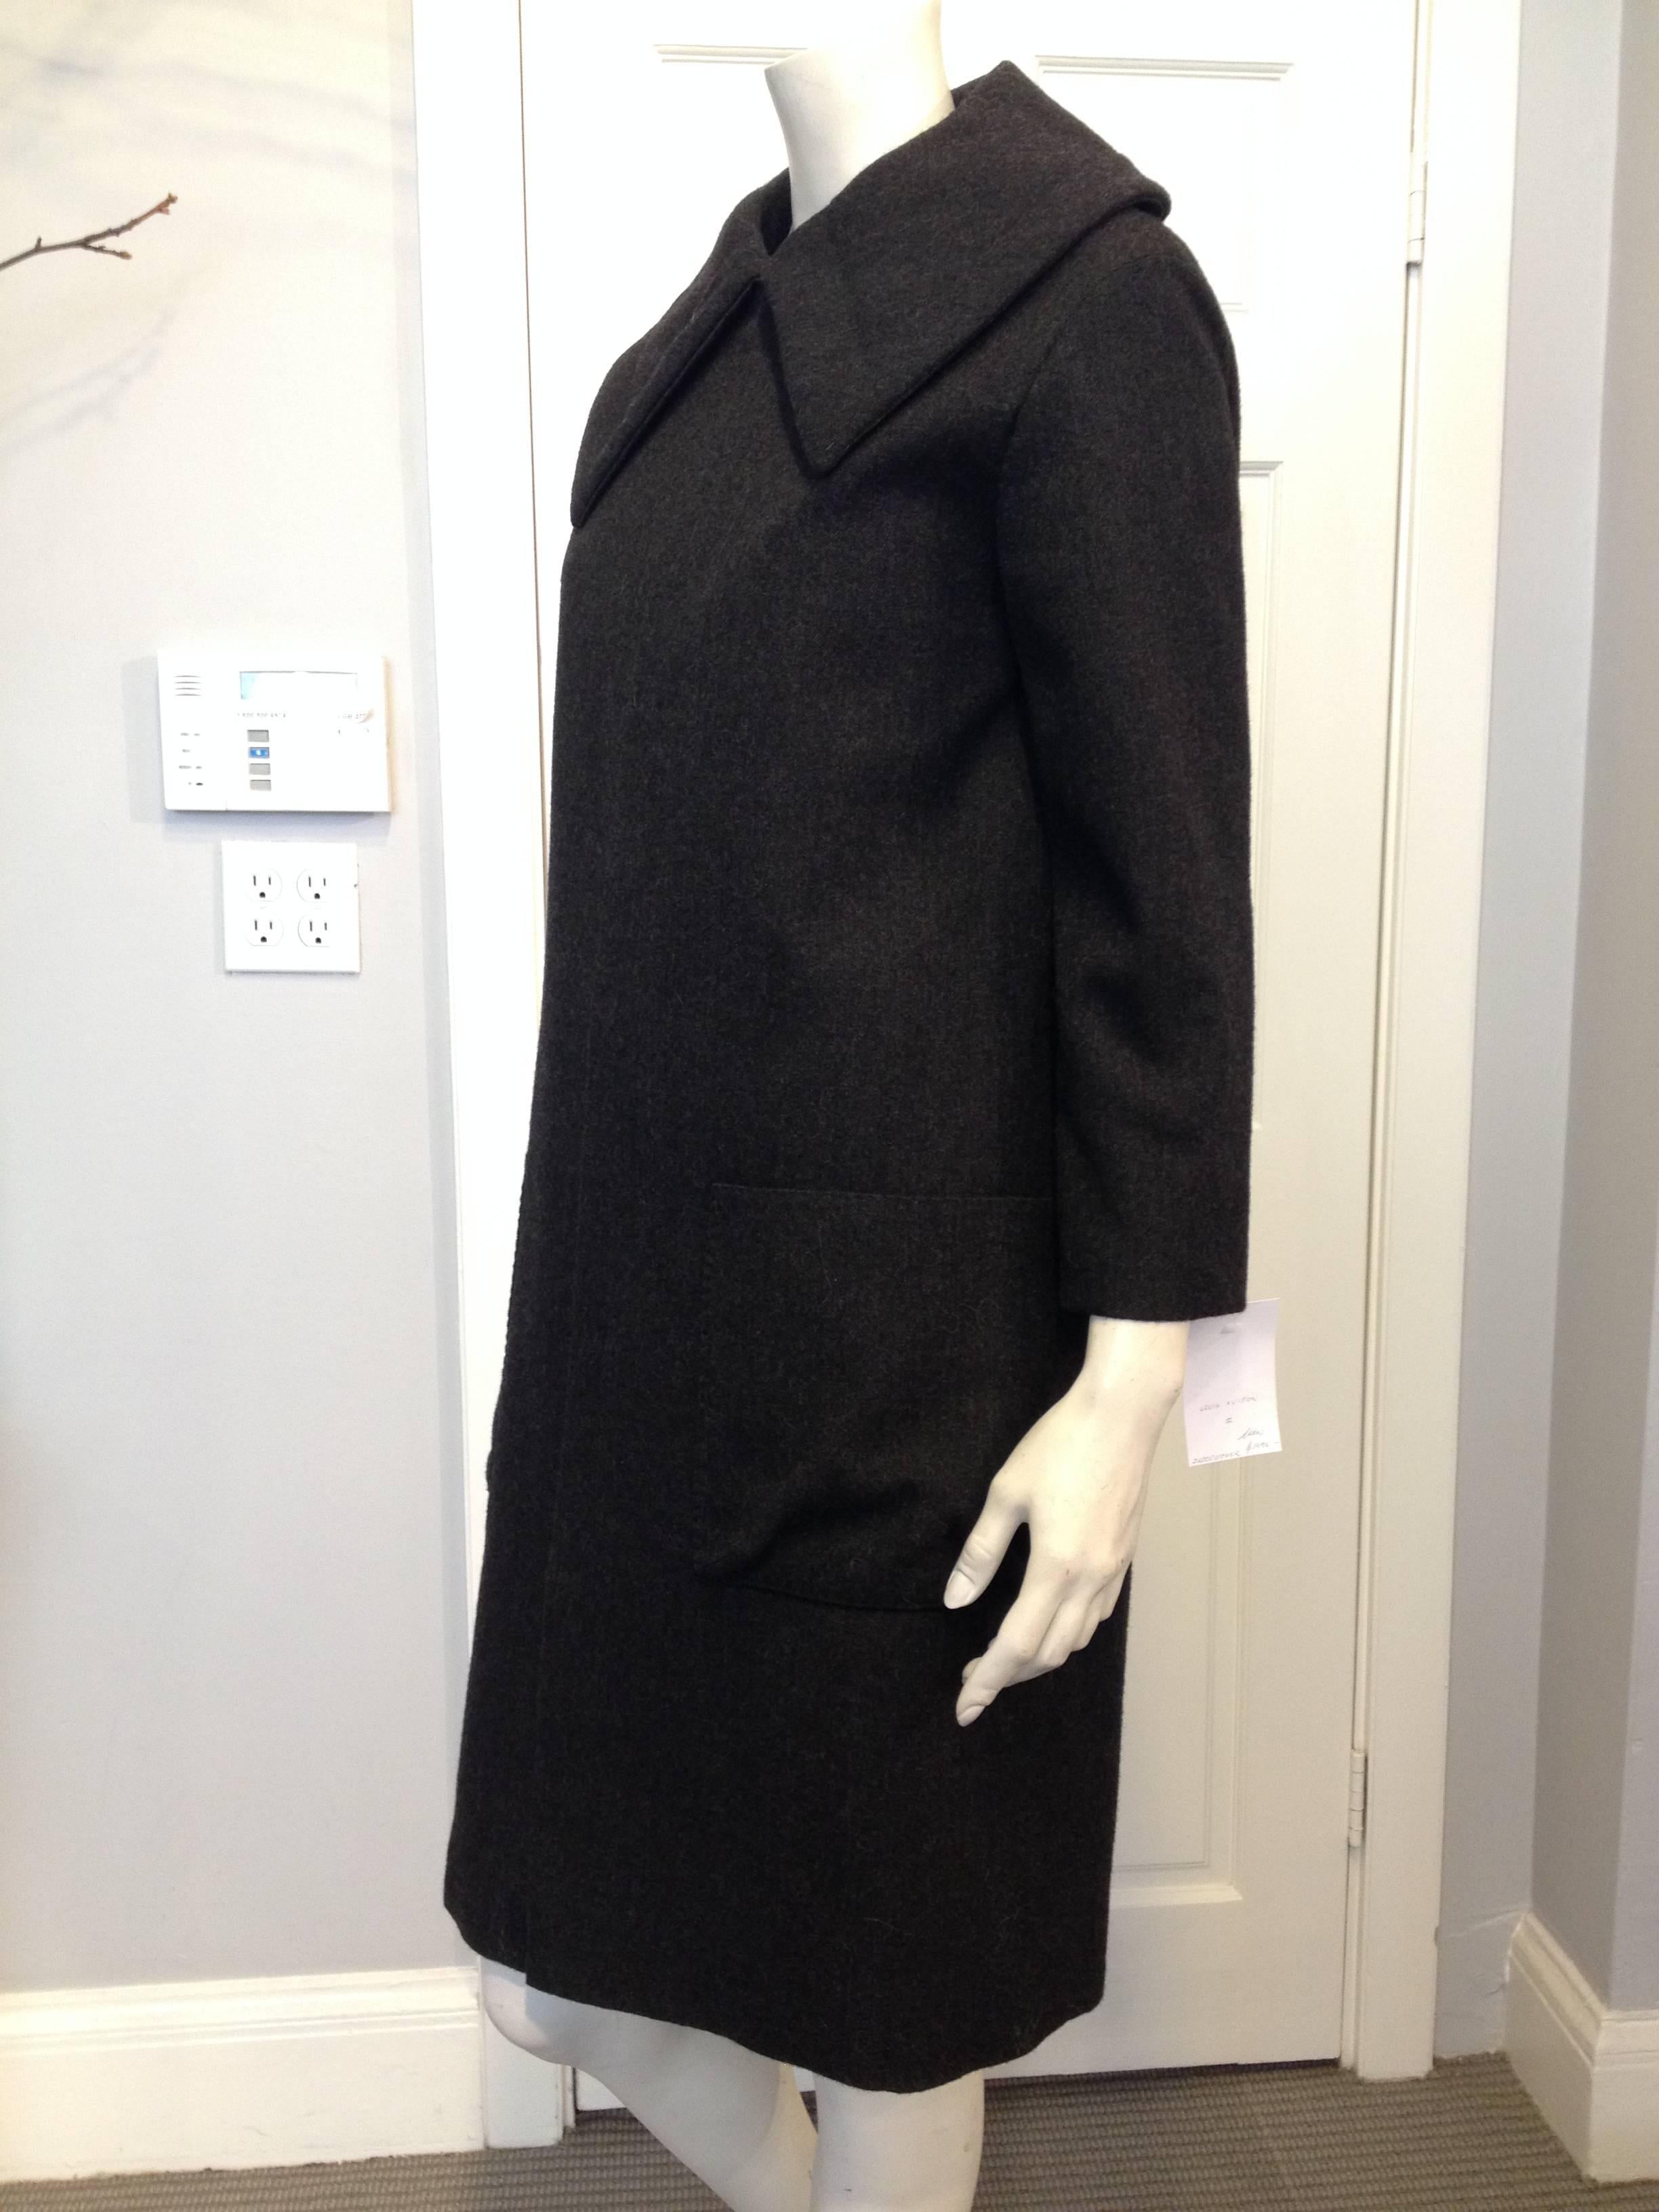 Pure glamour - this impeccable Louis Vuitton wool coat is the epitome of style. It is cut classically with a grand collar, wide sleeves, and a very subtly voluminous body, a skillfully shaped piece that will look as chic in twenty years as it does